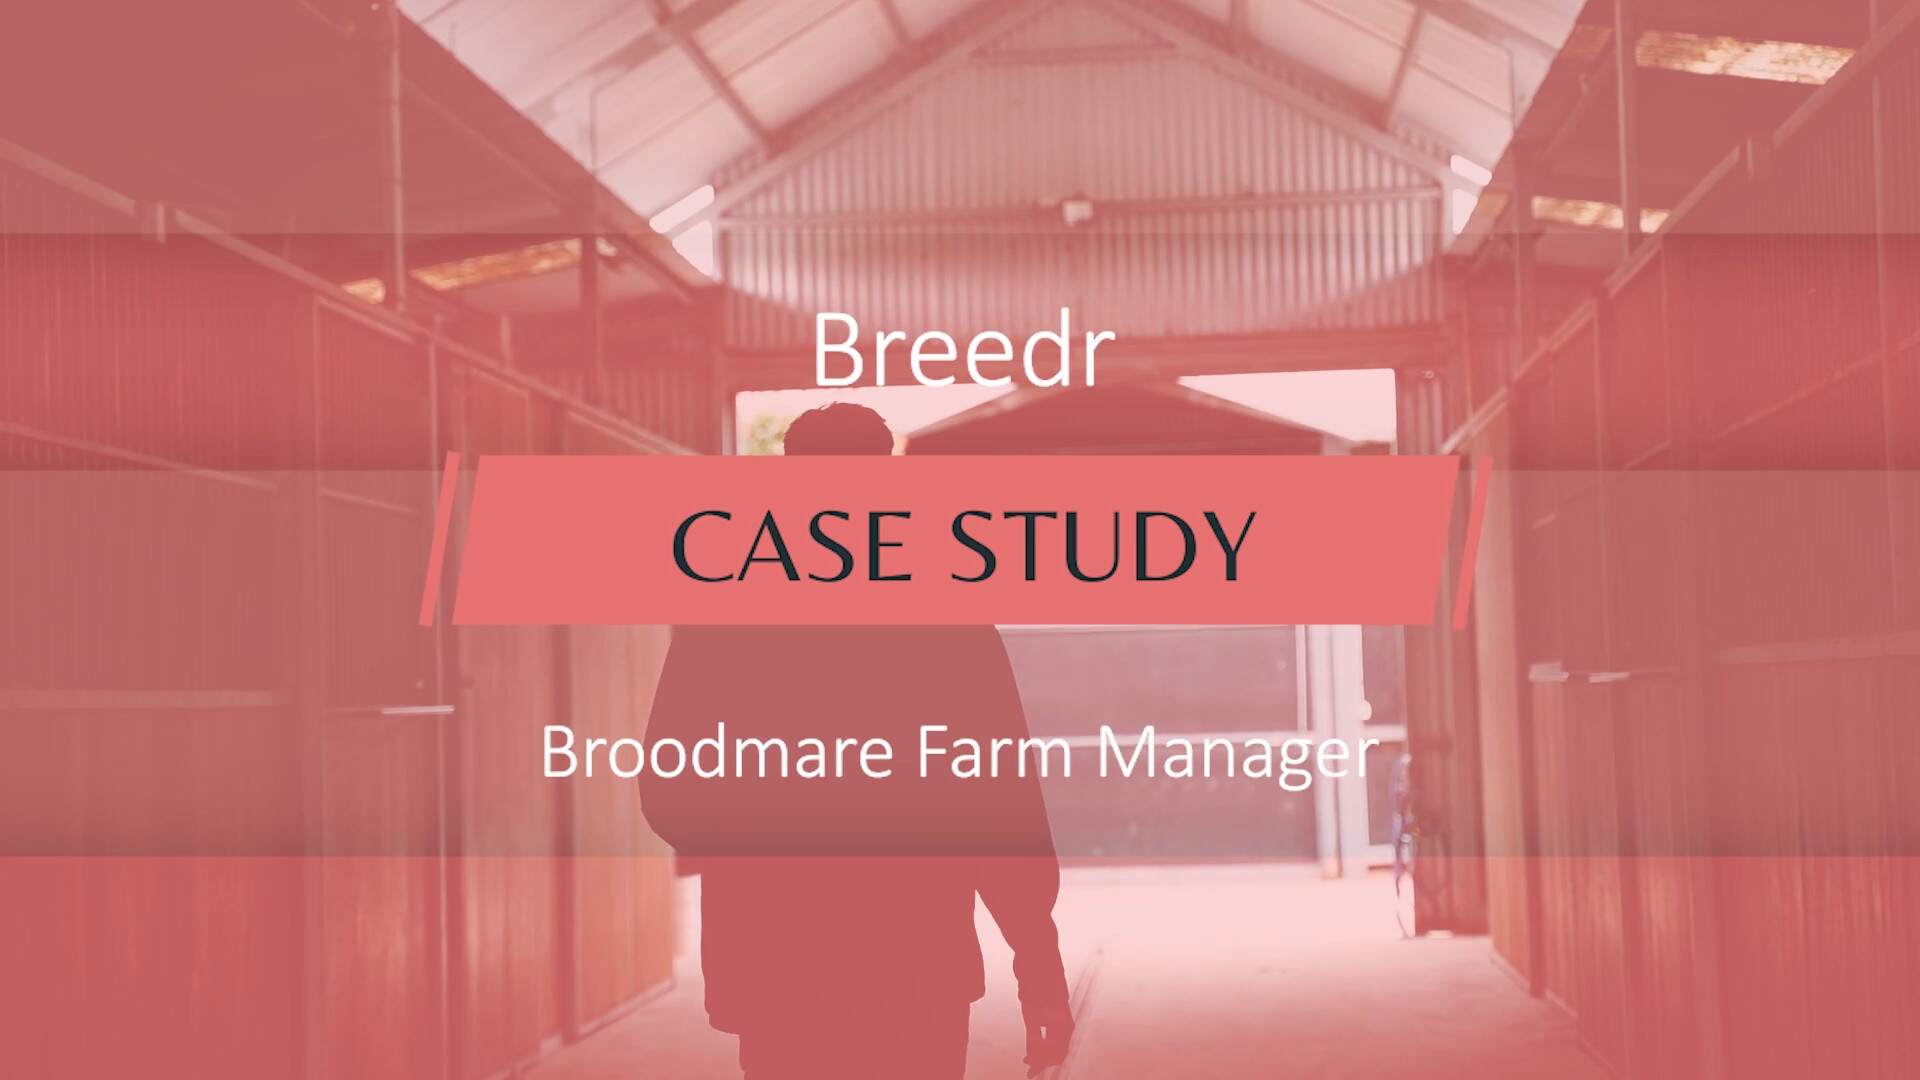 Case study Broodmare Farm Manager